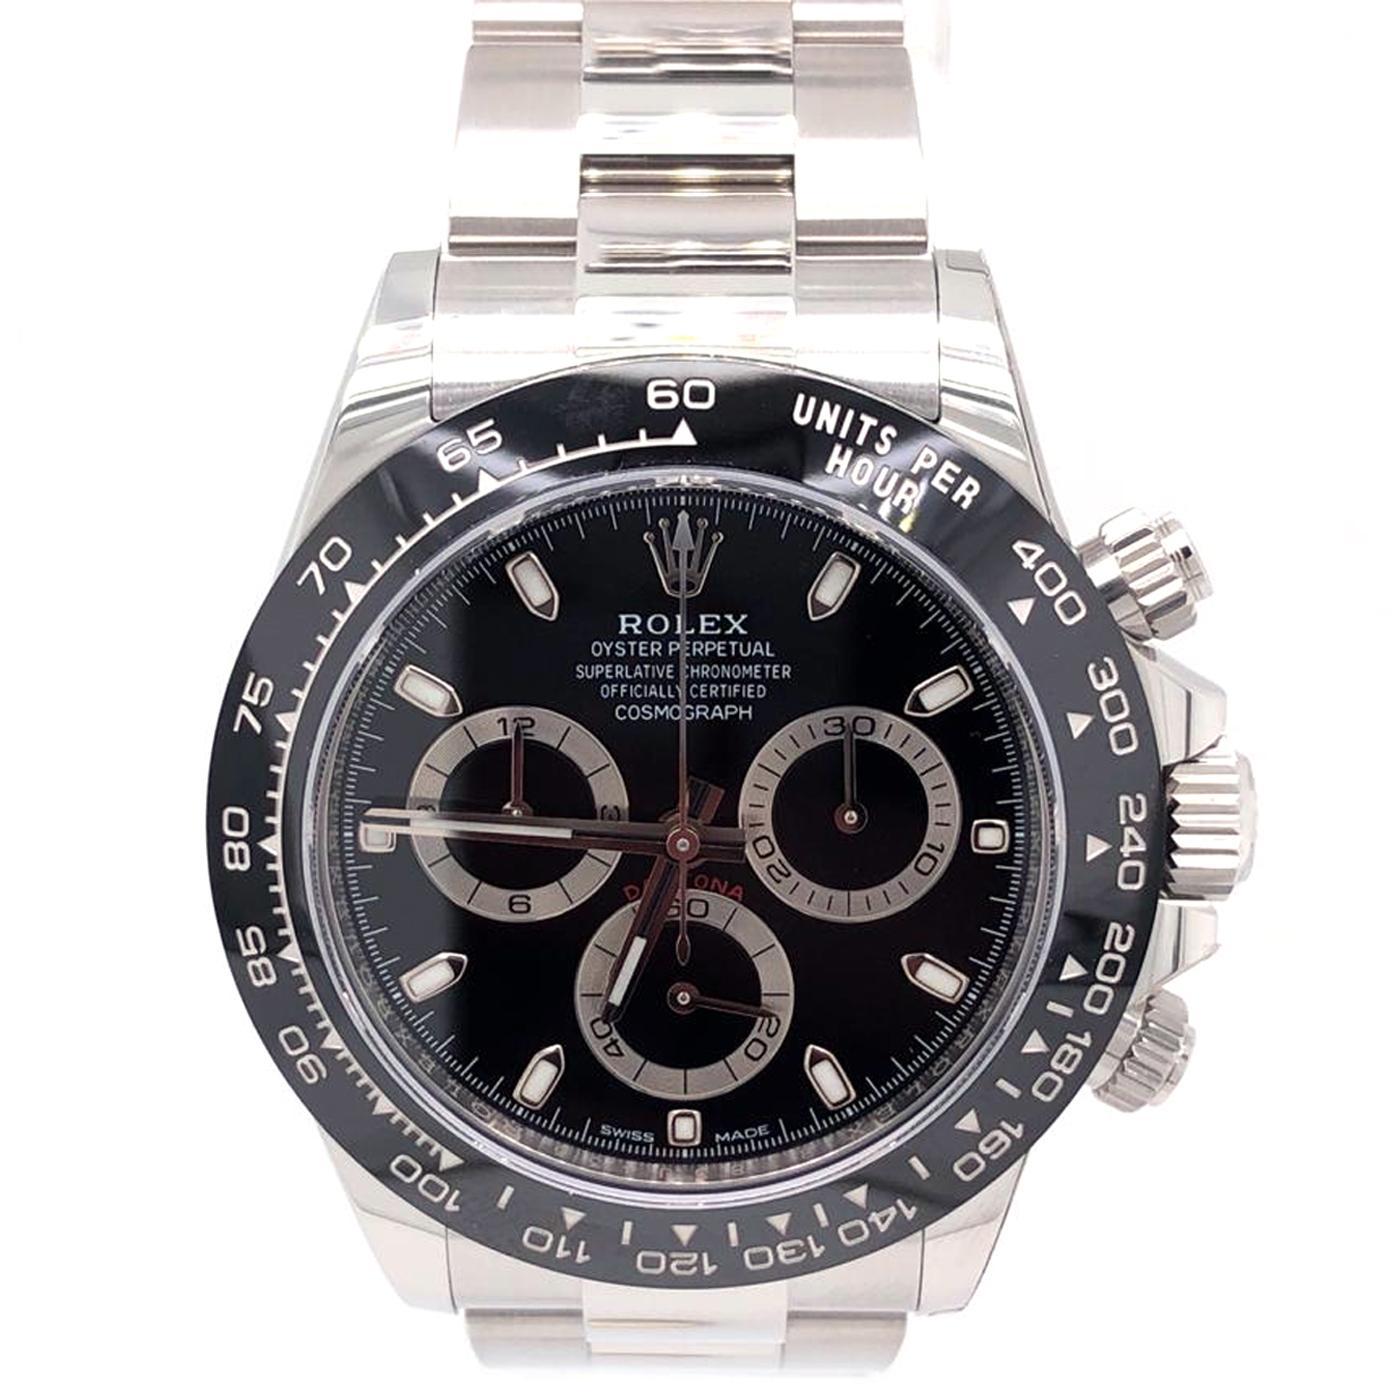 Brand: Rolex
Model: Daytona
Movement: Automatic
Case material: Steel
Bracelet material: Steel
Year of production: 2020
Gender: Men's watch/Unisex
Movement: Automatic
Movement/Caliber: 4130
Base caliber: Cal.4130
Power reserve: 72 h
Number of jewels: